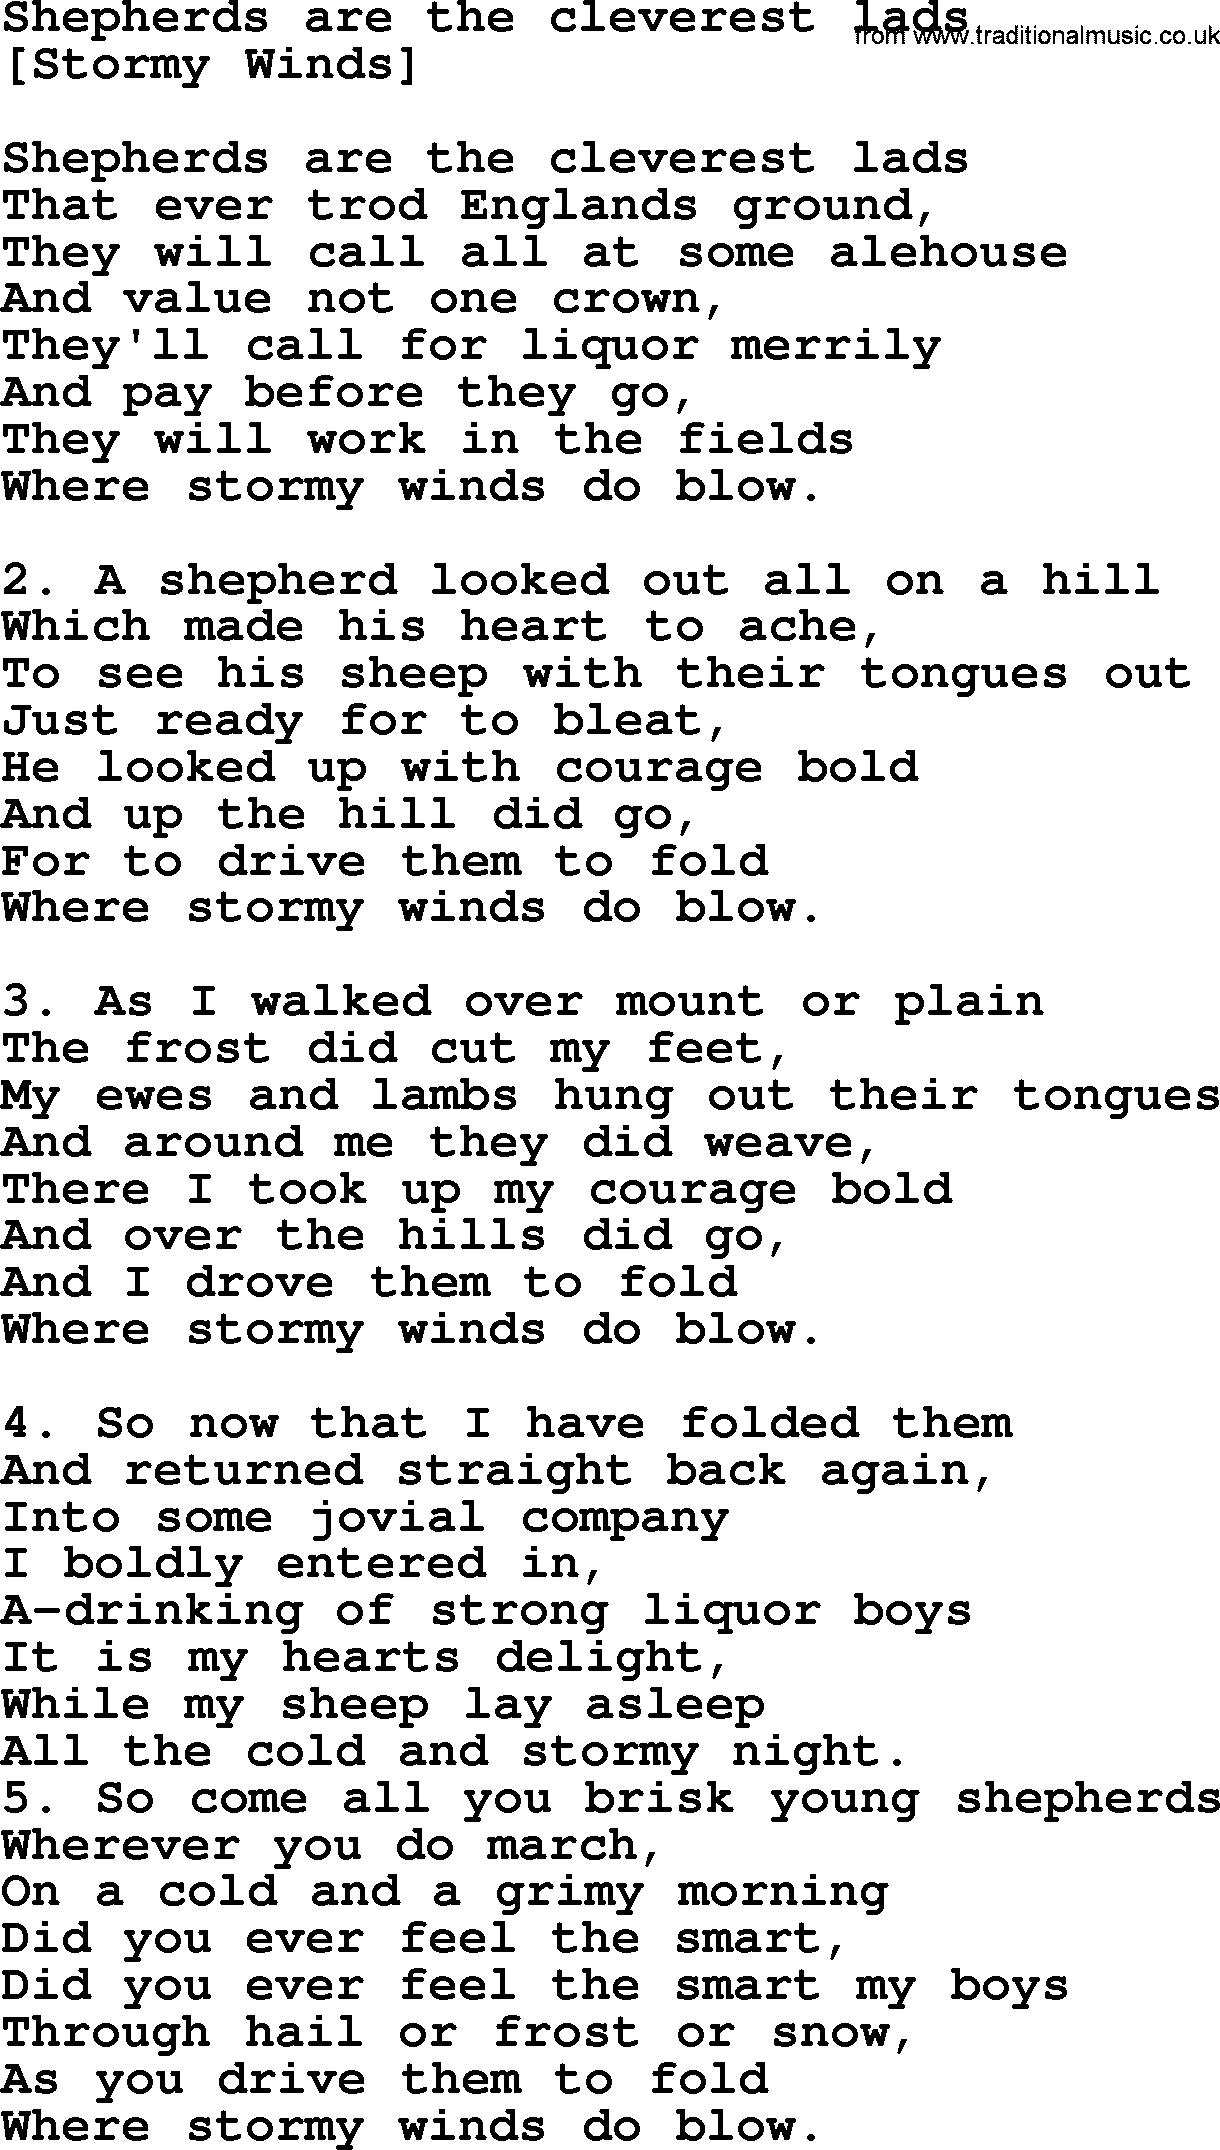 Old English Song: Shepherds Are The Cleverest Lads lyrics